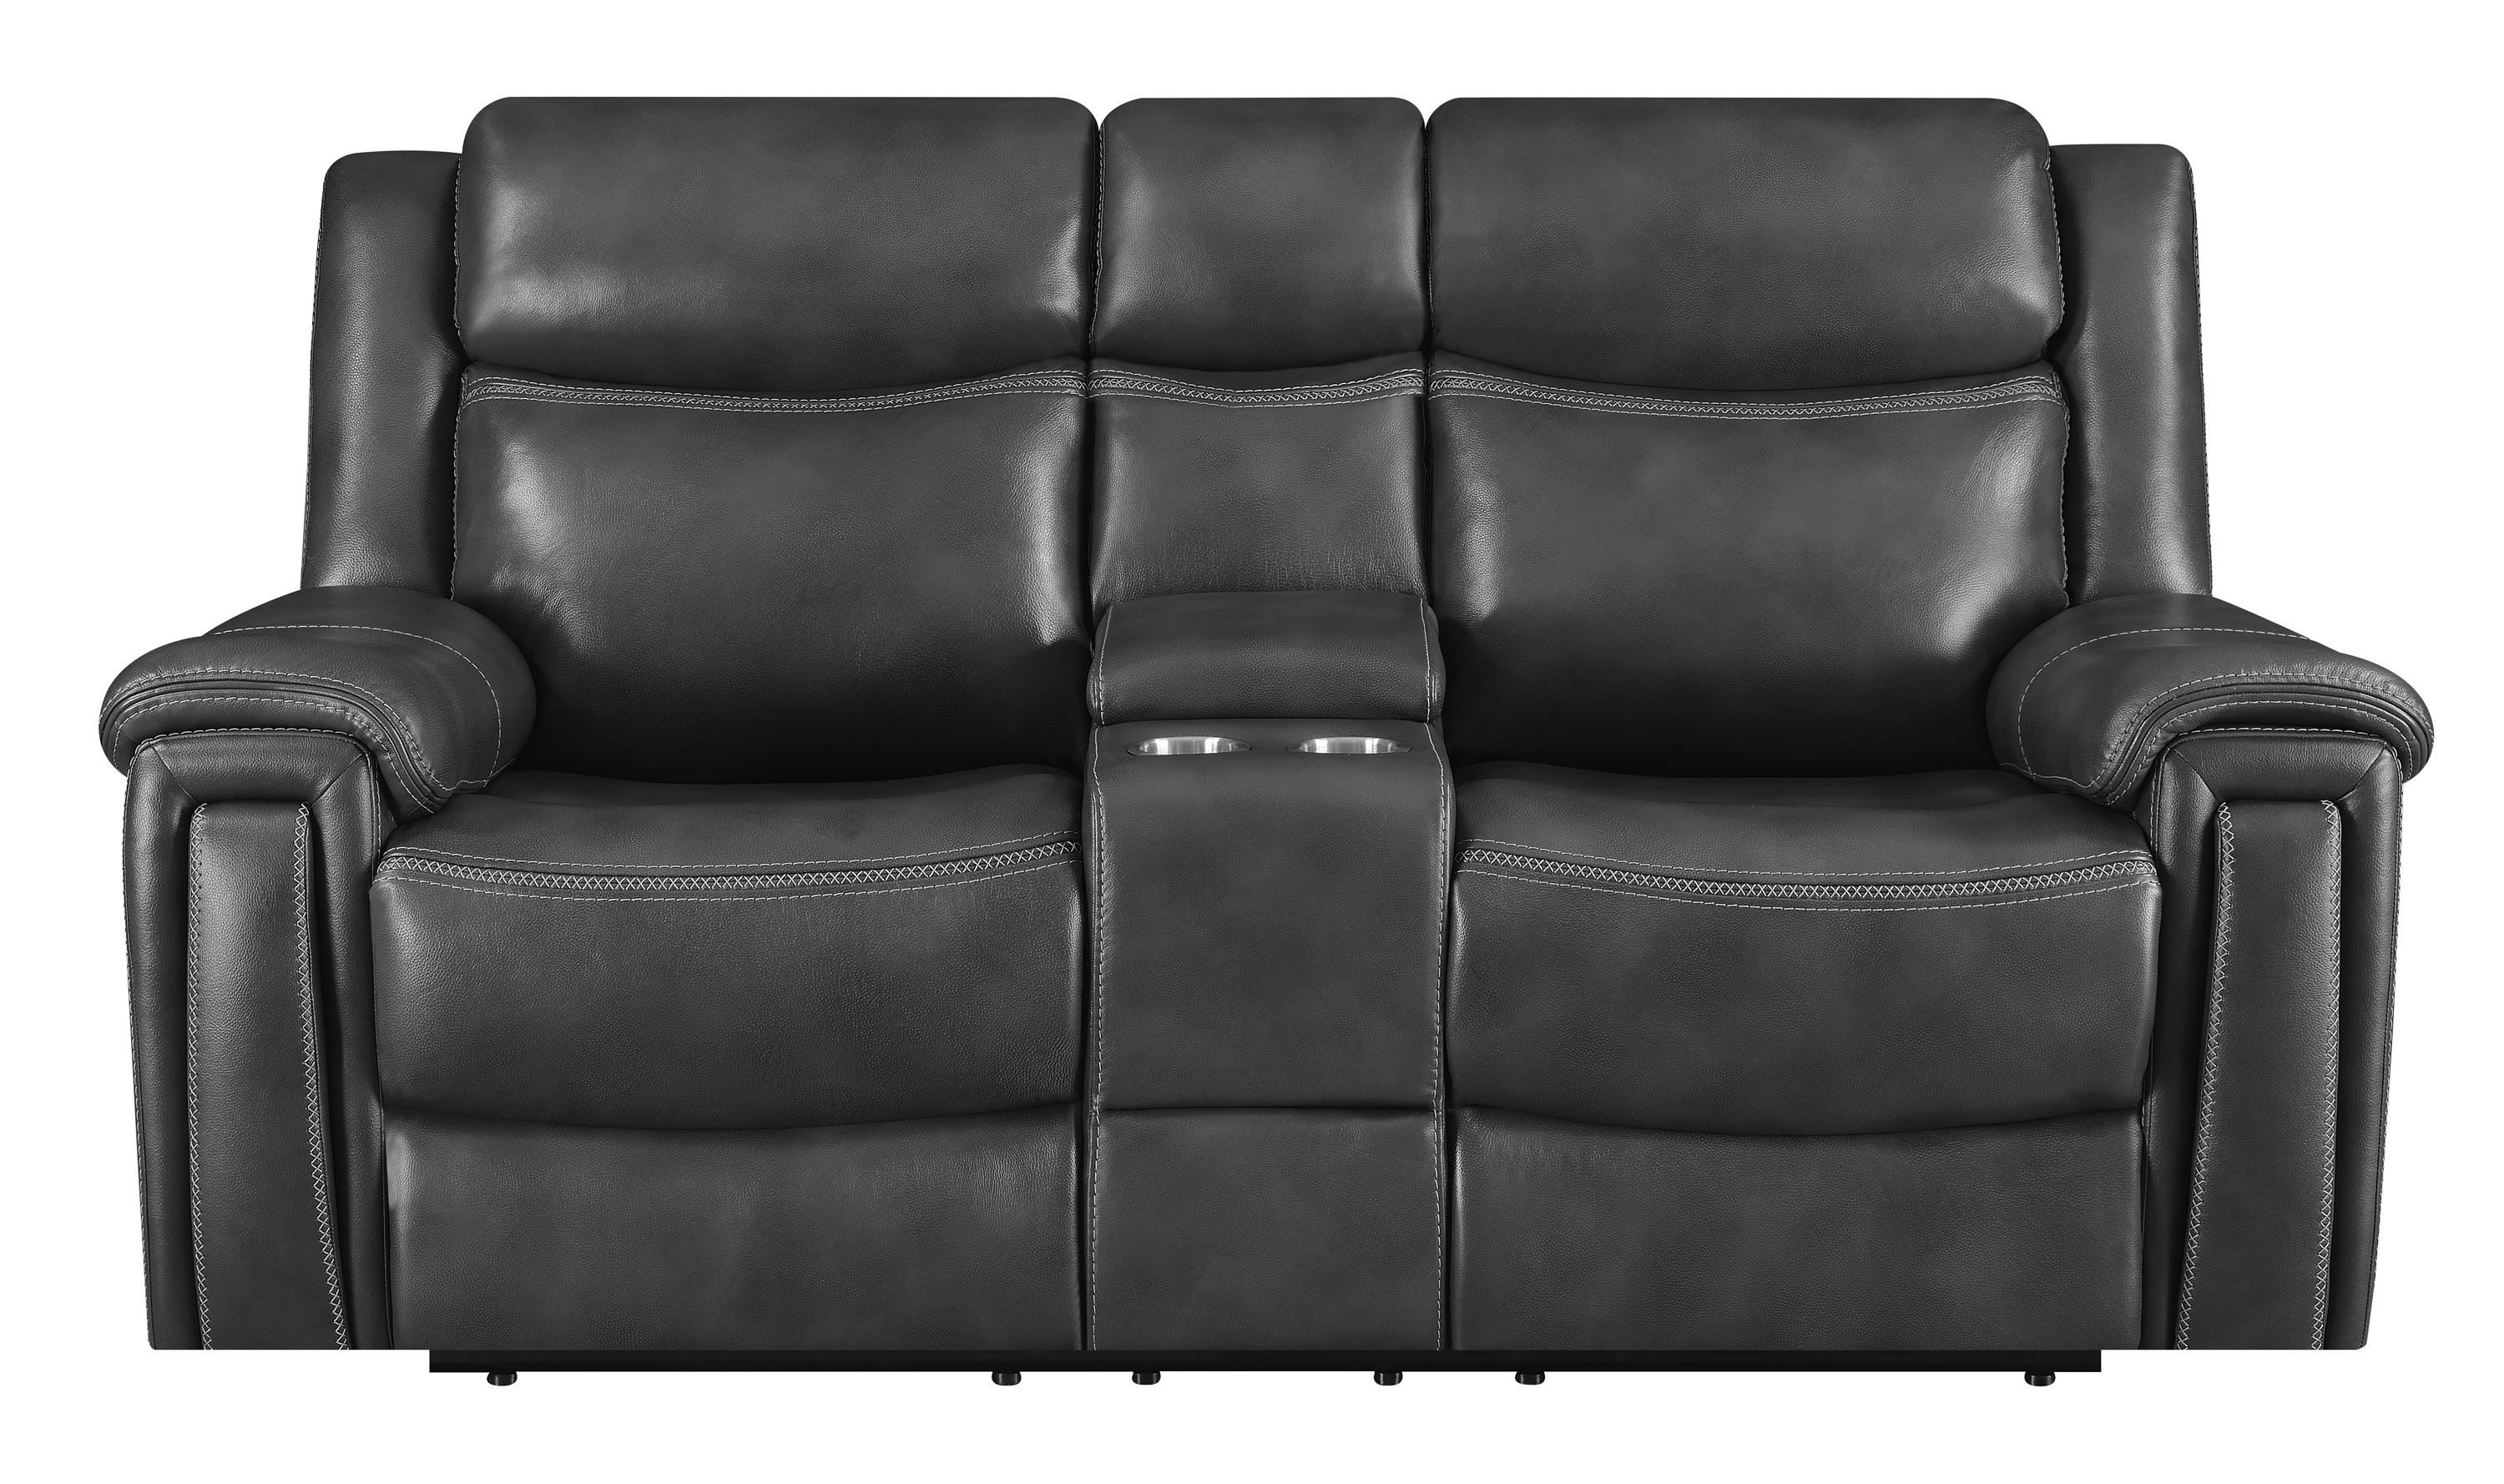 Transitional Power loveseat 609322PP Shallowford 609322PP in Charcoal Leather